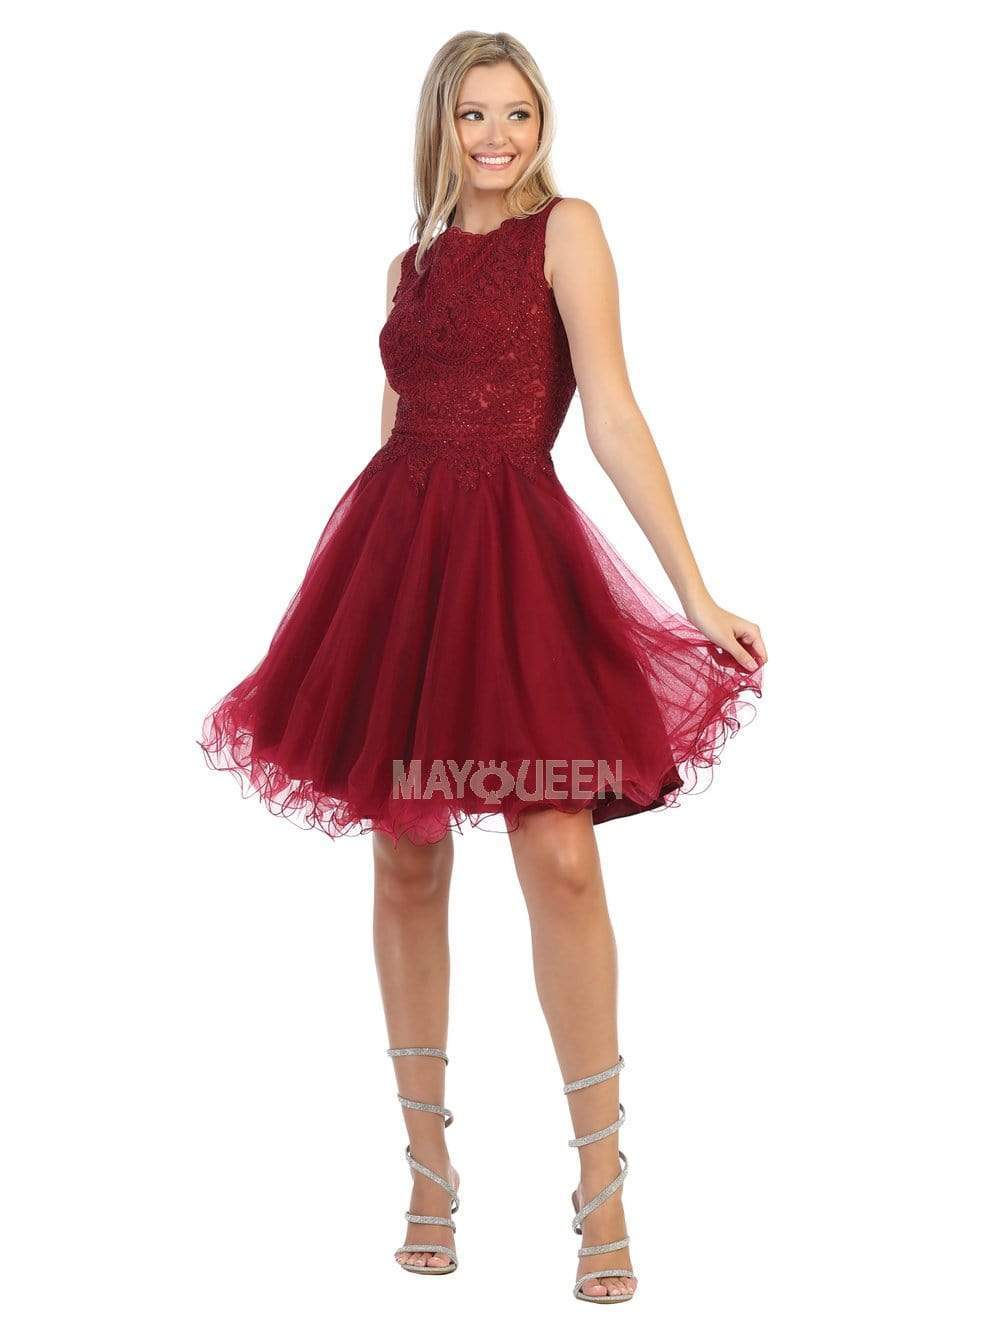 May Queen - MQ1751 Embroidered Bateau A-line Dress Homecoming Dresses 4 / Burgundy